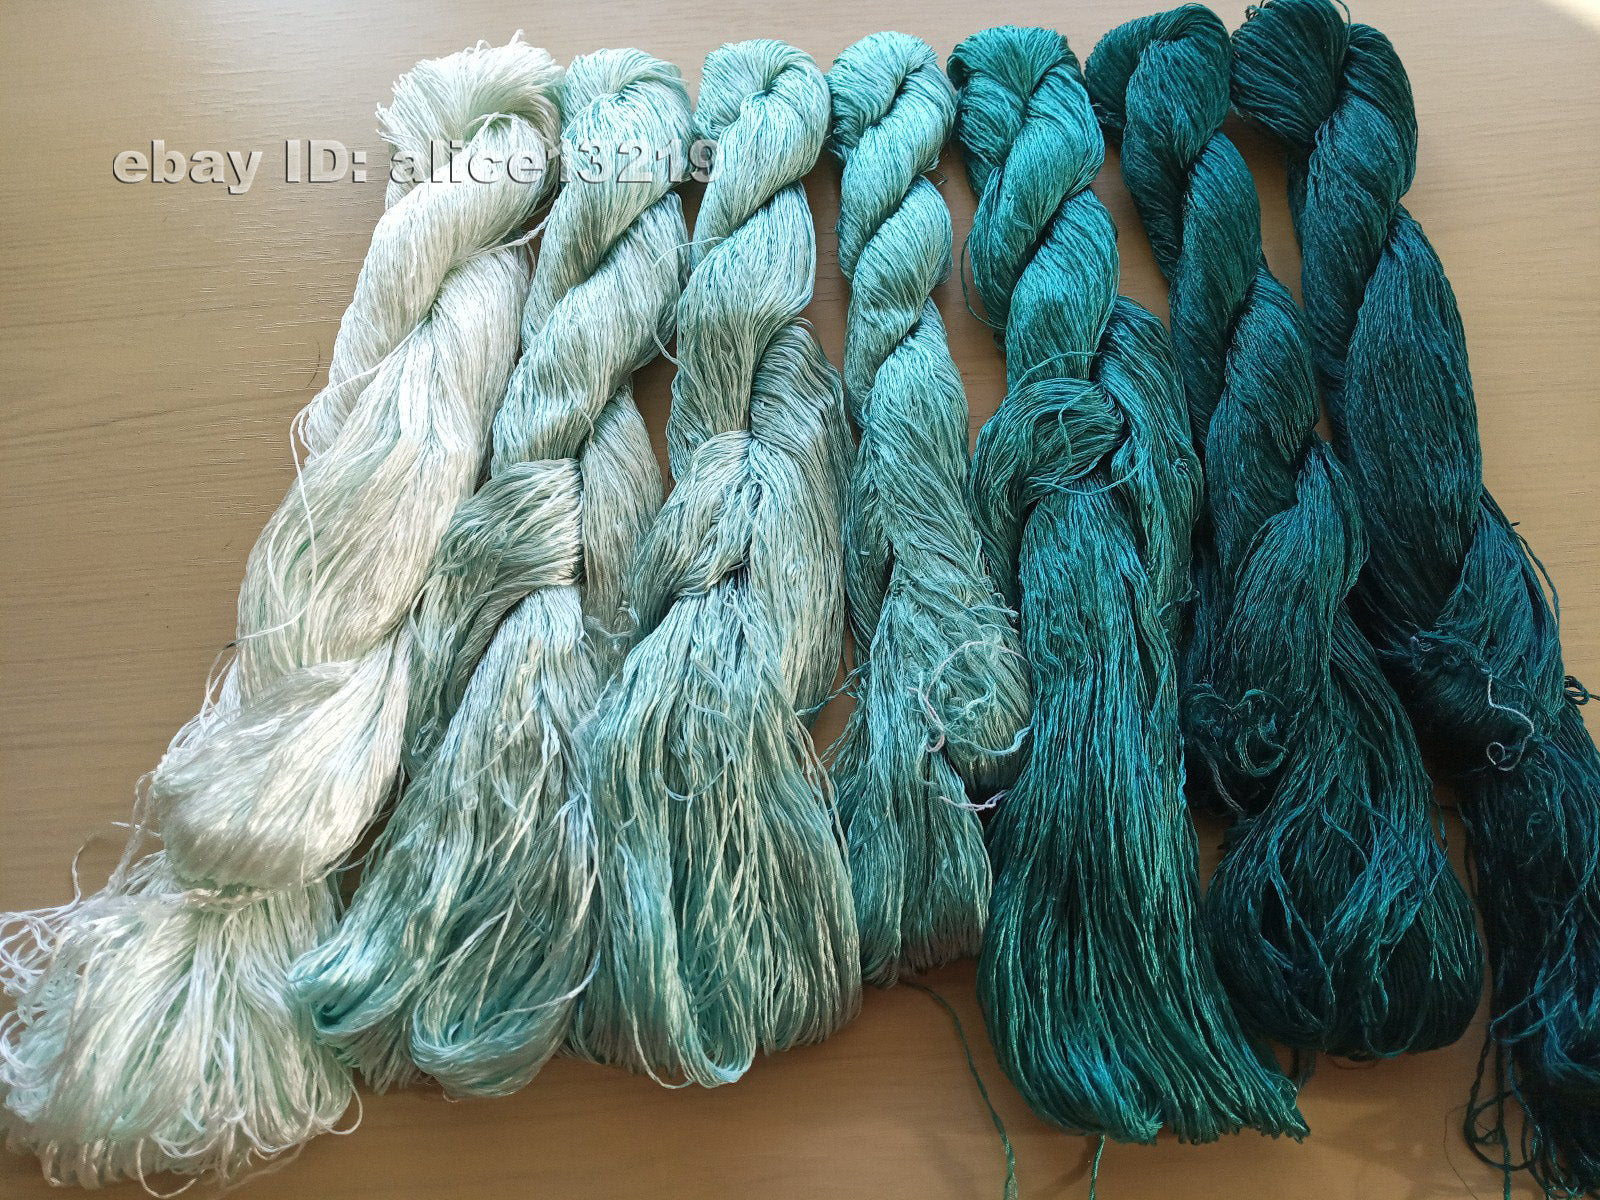 7bundles 100%real mulberry silk,hand-dyed embroidery silk floss/thread N50